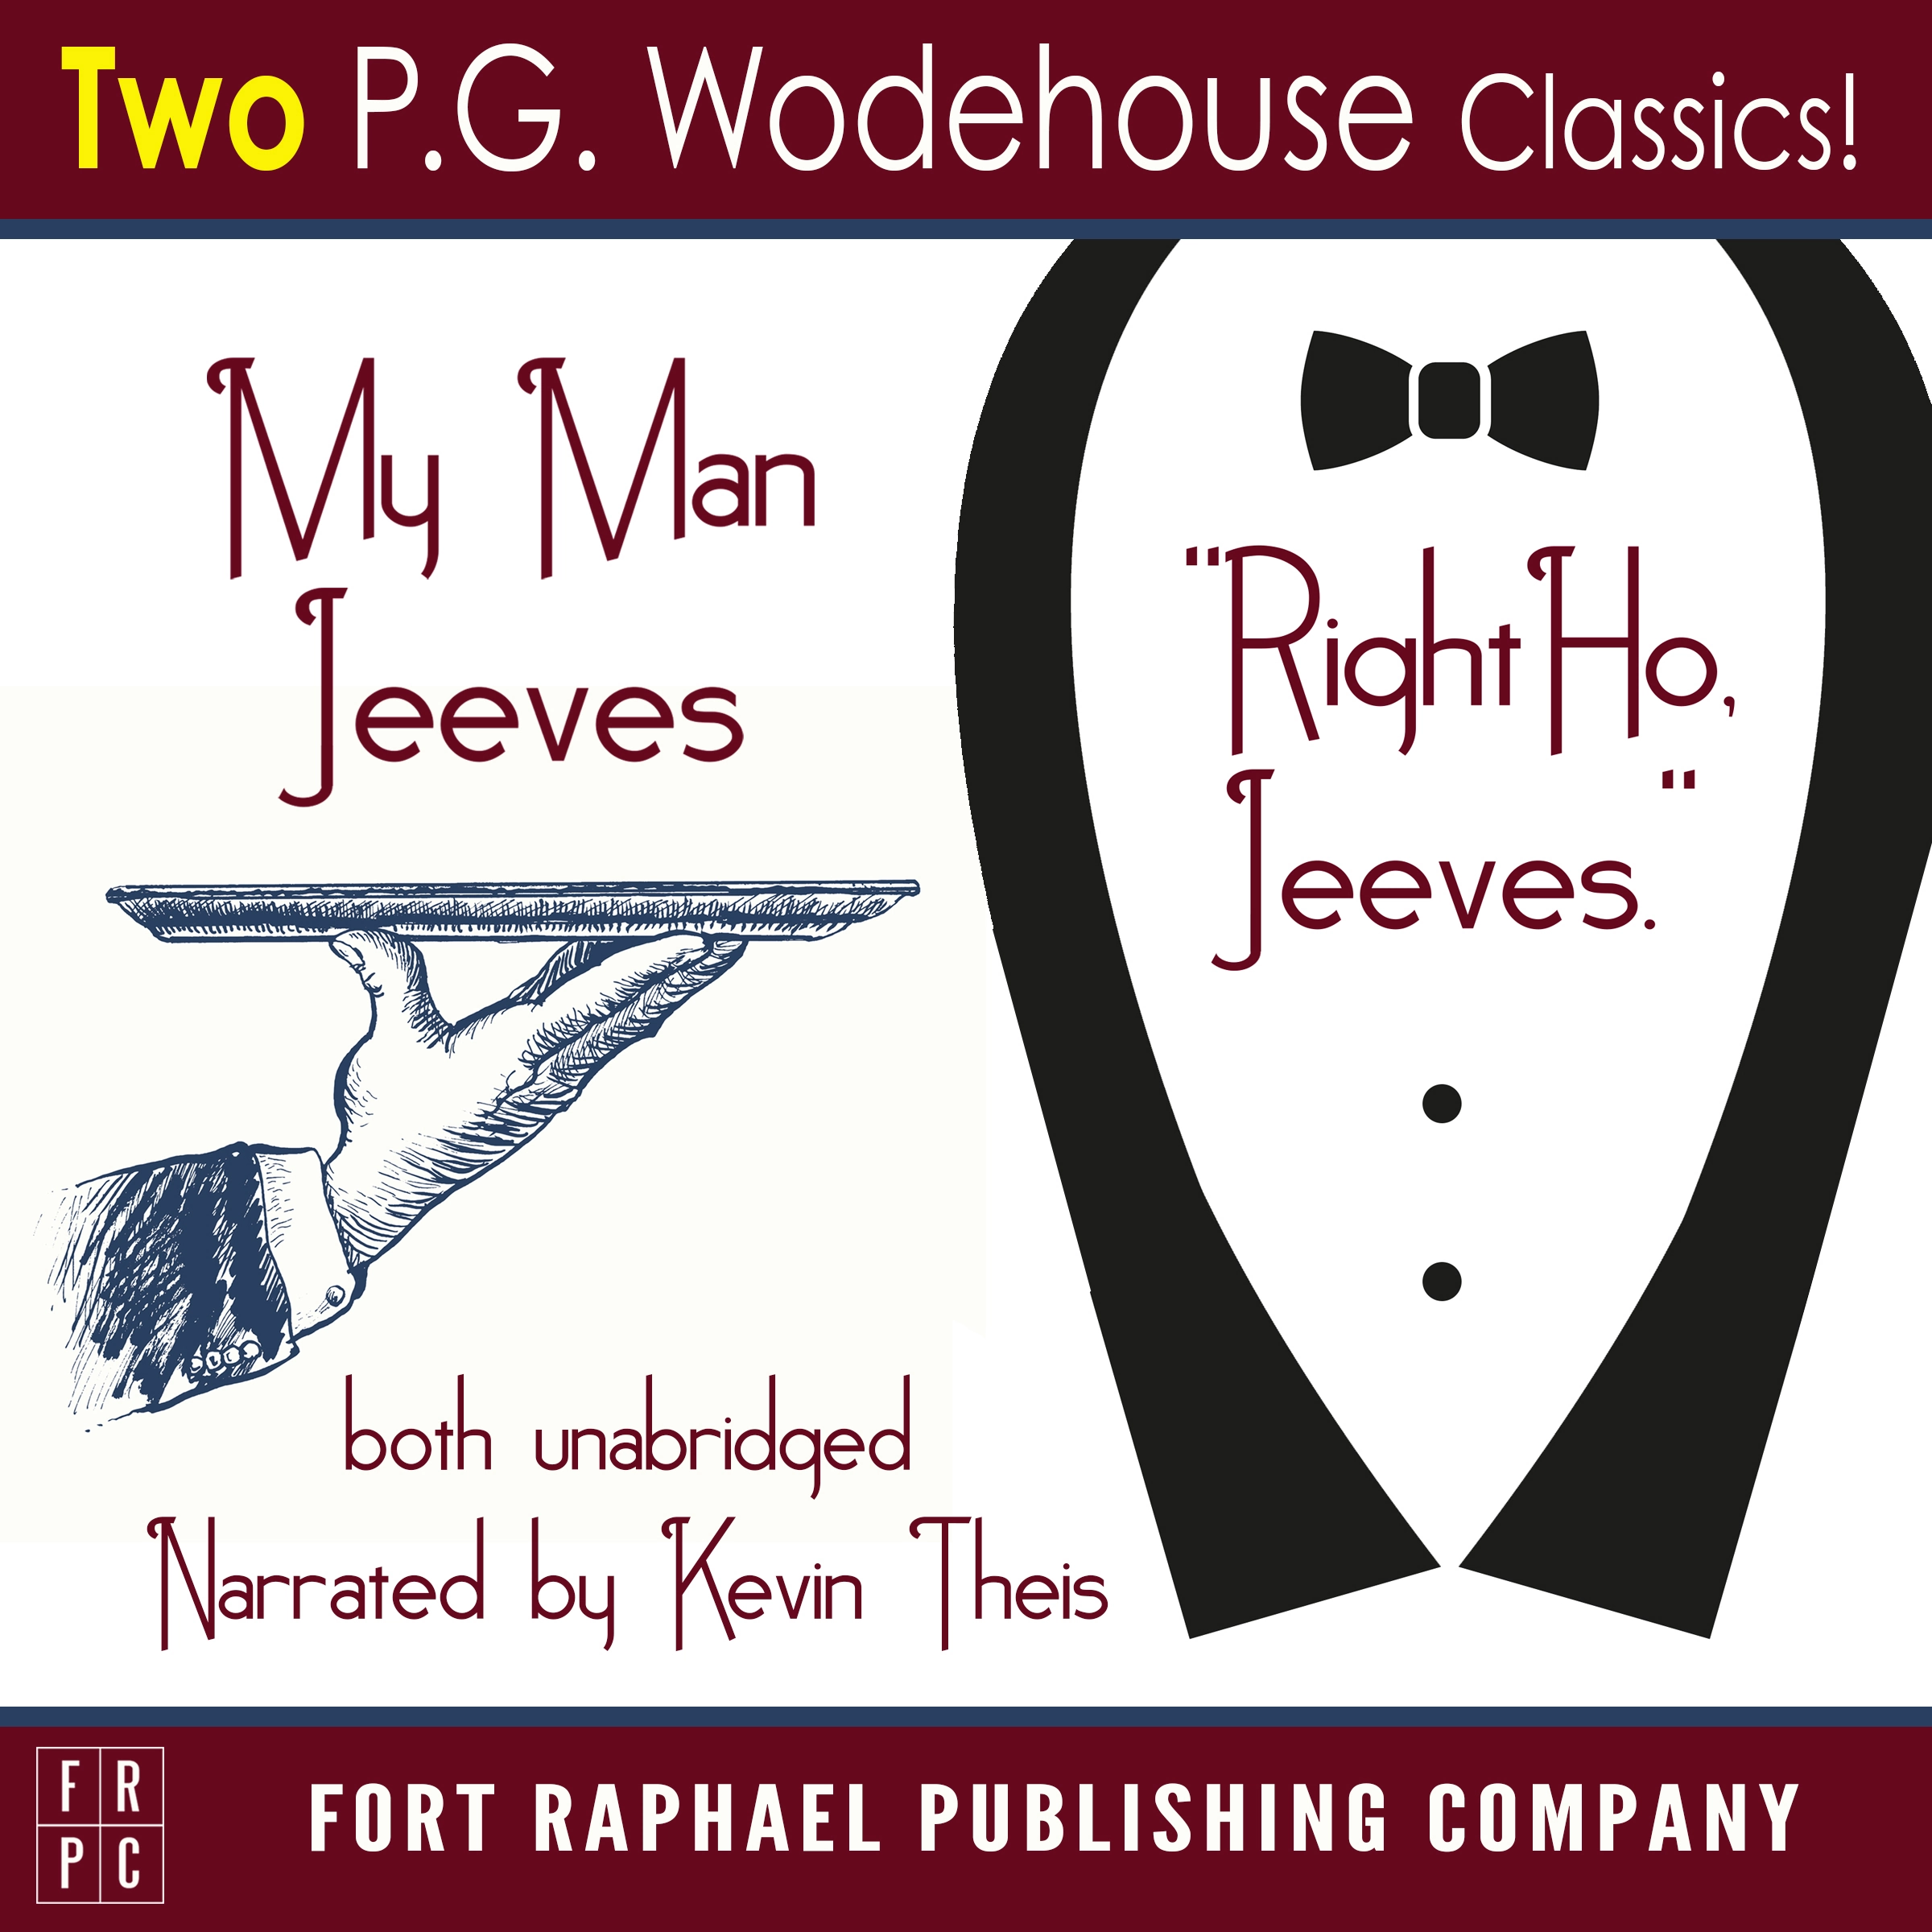 My Man Jeeves and Right Ho, Jeeves - Unabridged by P.G. Wodehouse Audiobook